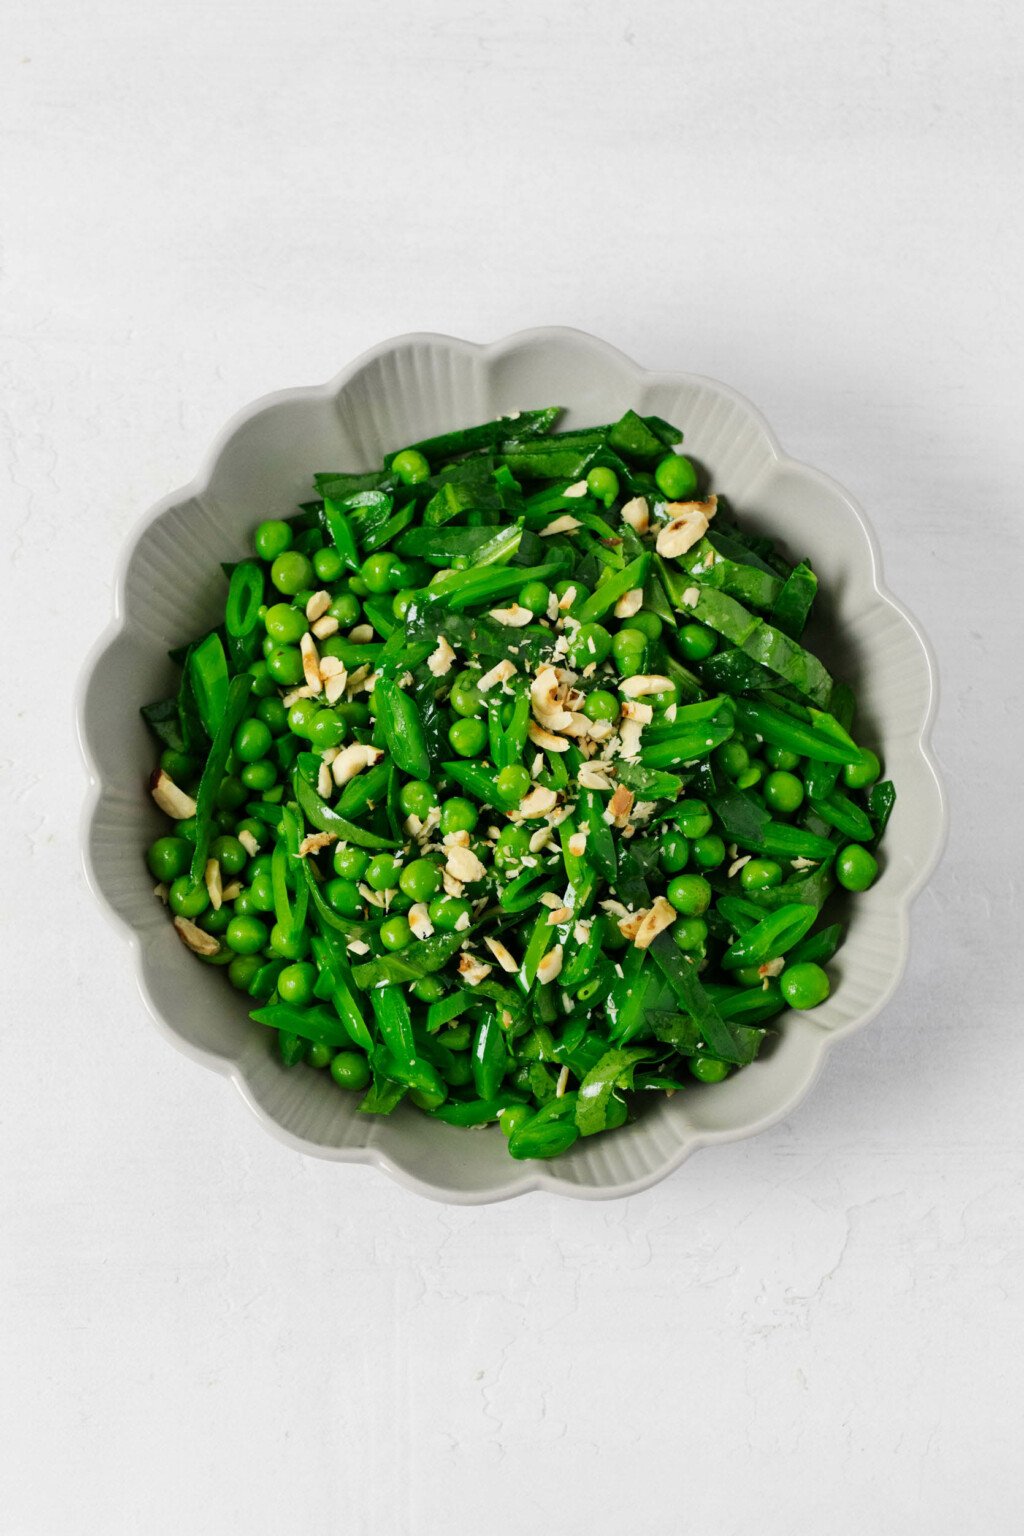 A round, fluted white bowl is filled with bright green, fresh peas and thinly sliced snap peas, along with spinach. The vegetables glisten lightly with a vinaigrette. There are finely chopped roasted nuts on top.